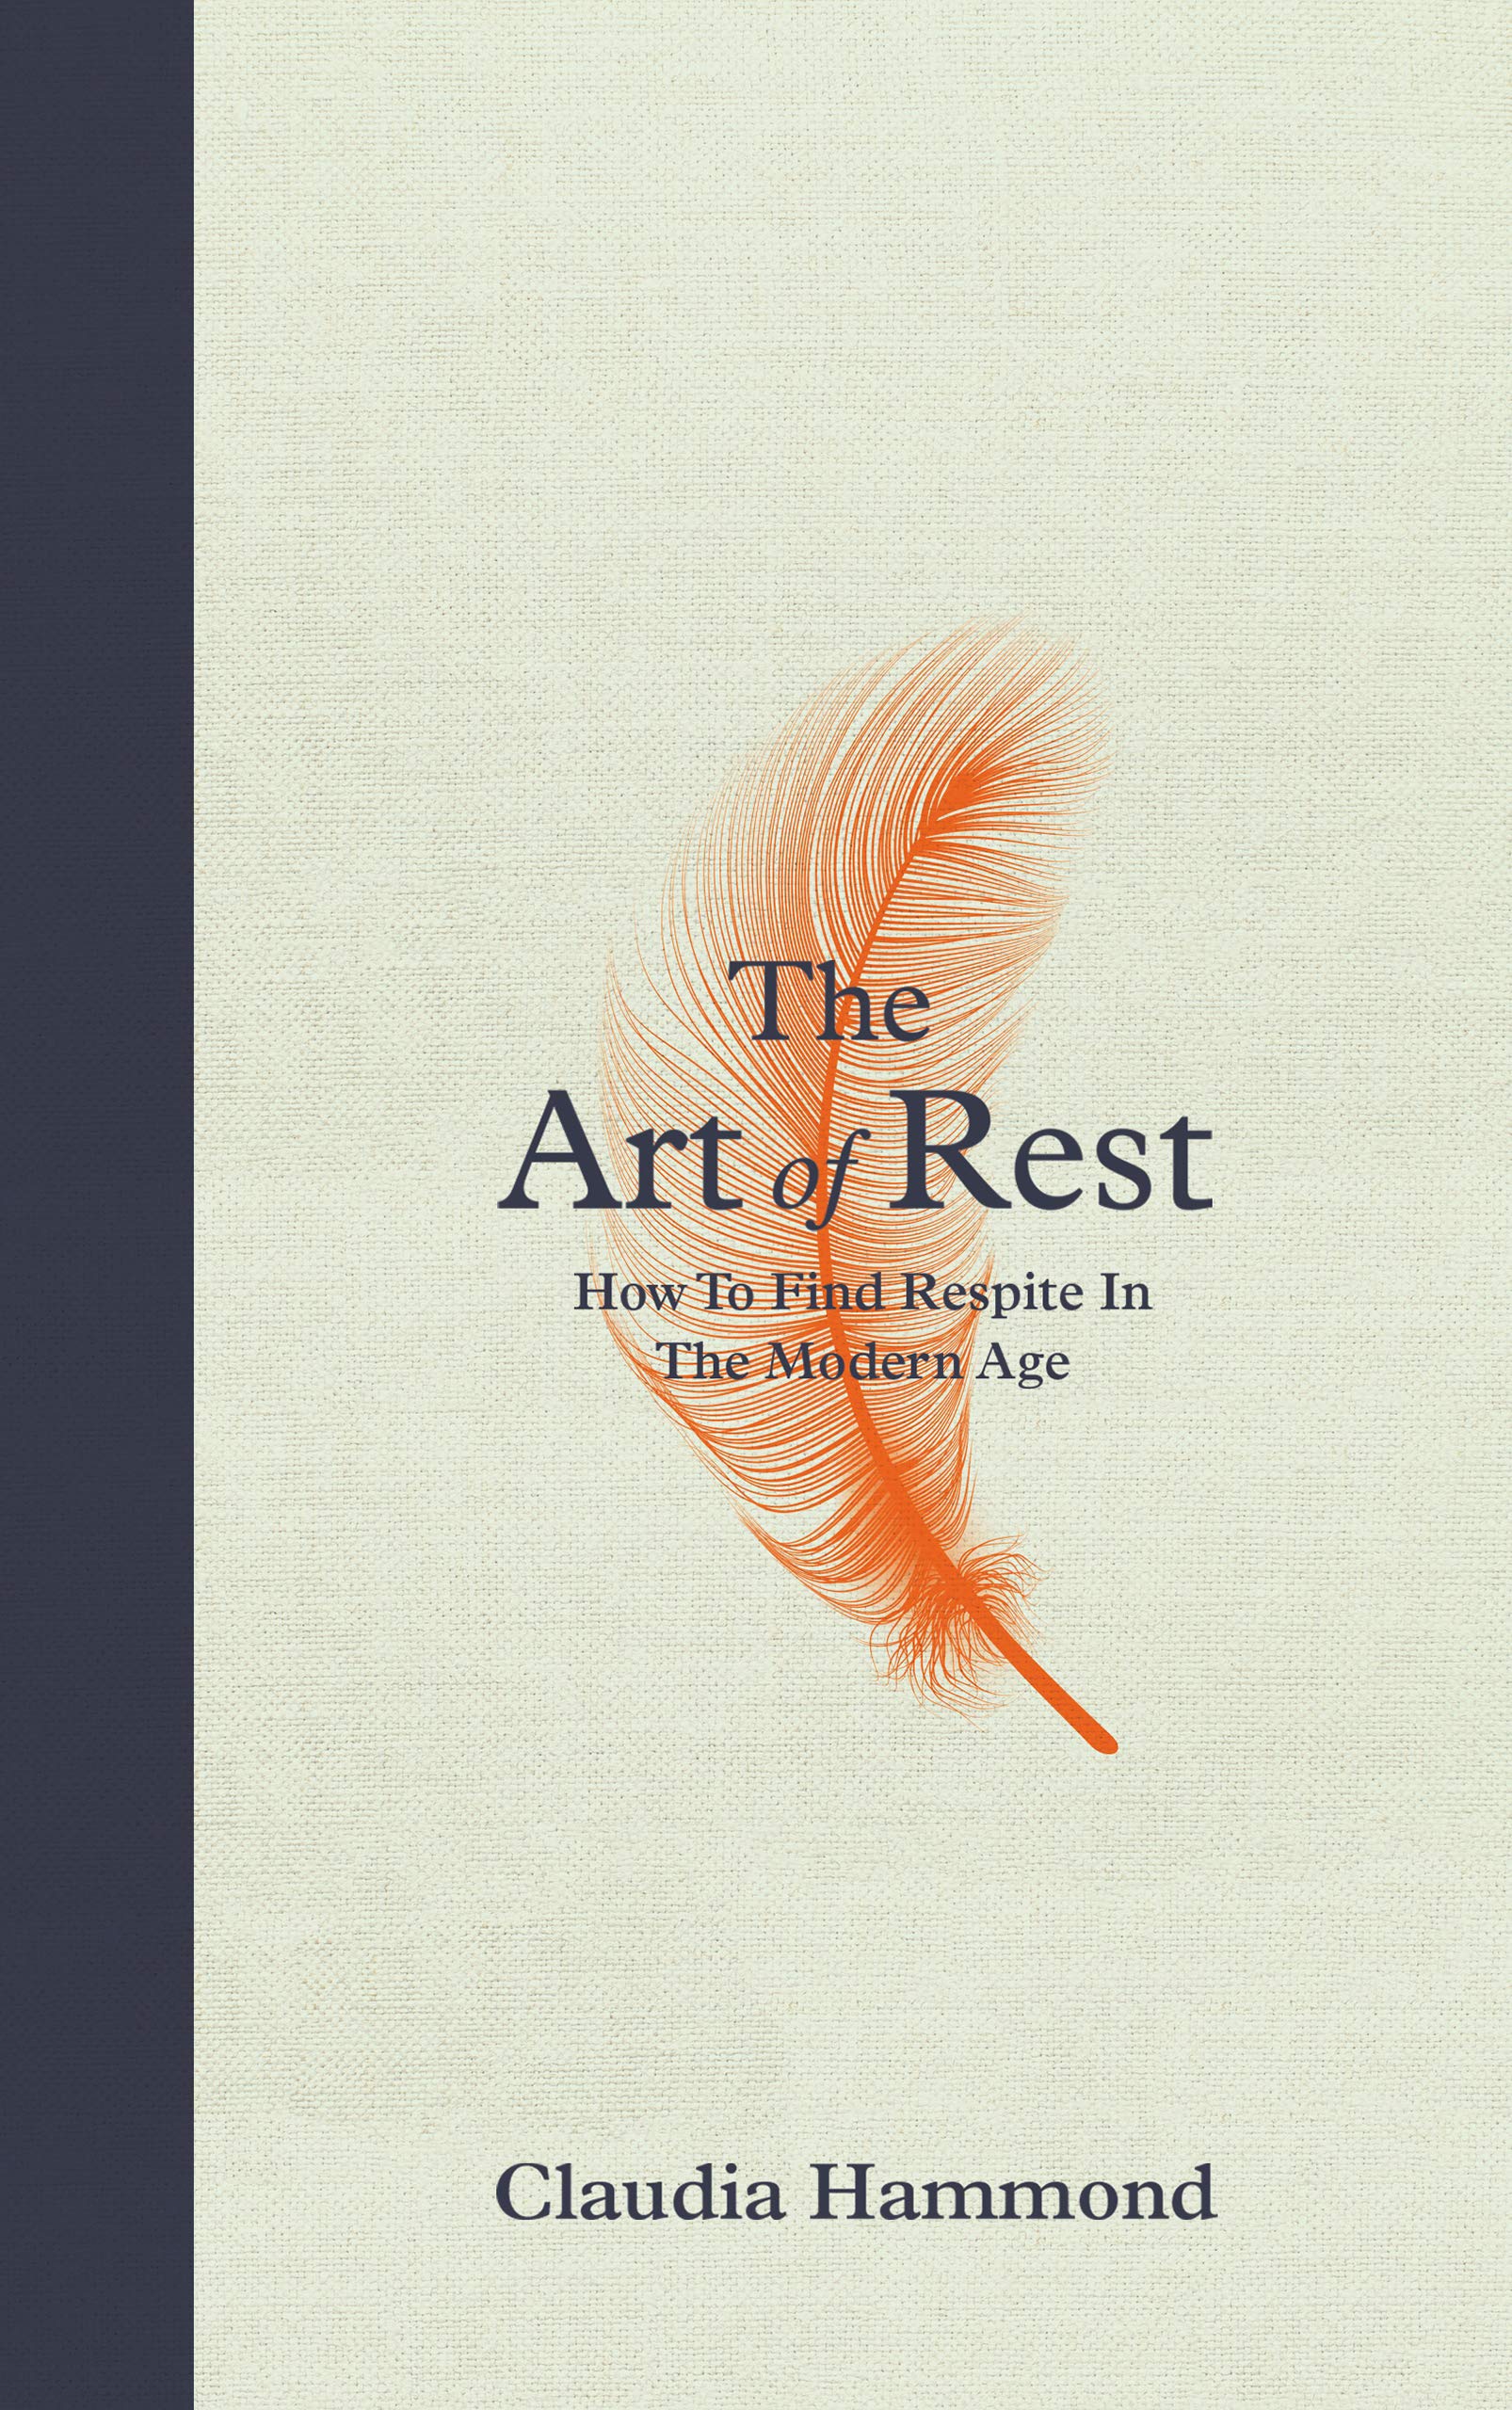 The Art of Rest by Claudia Hammond